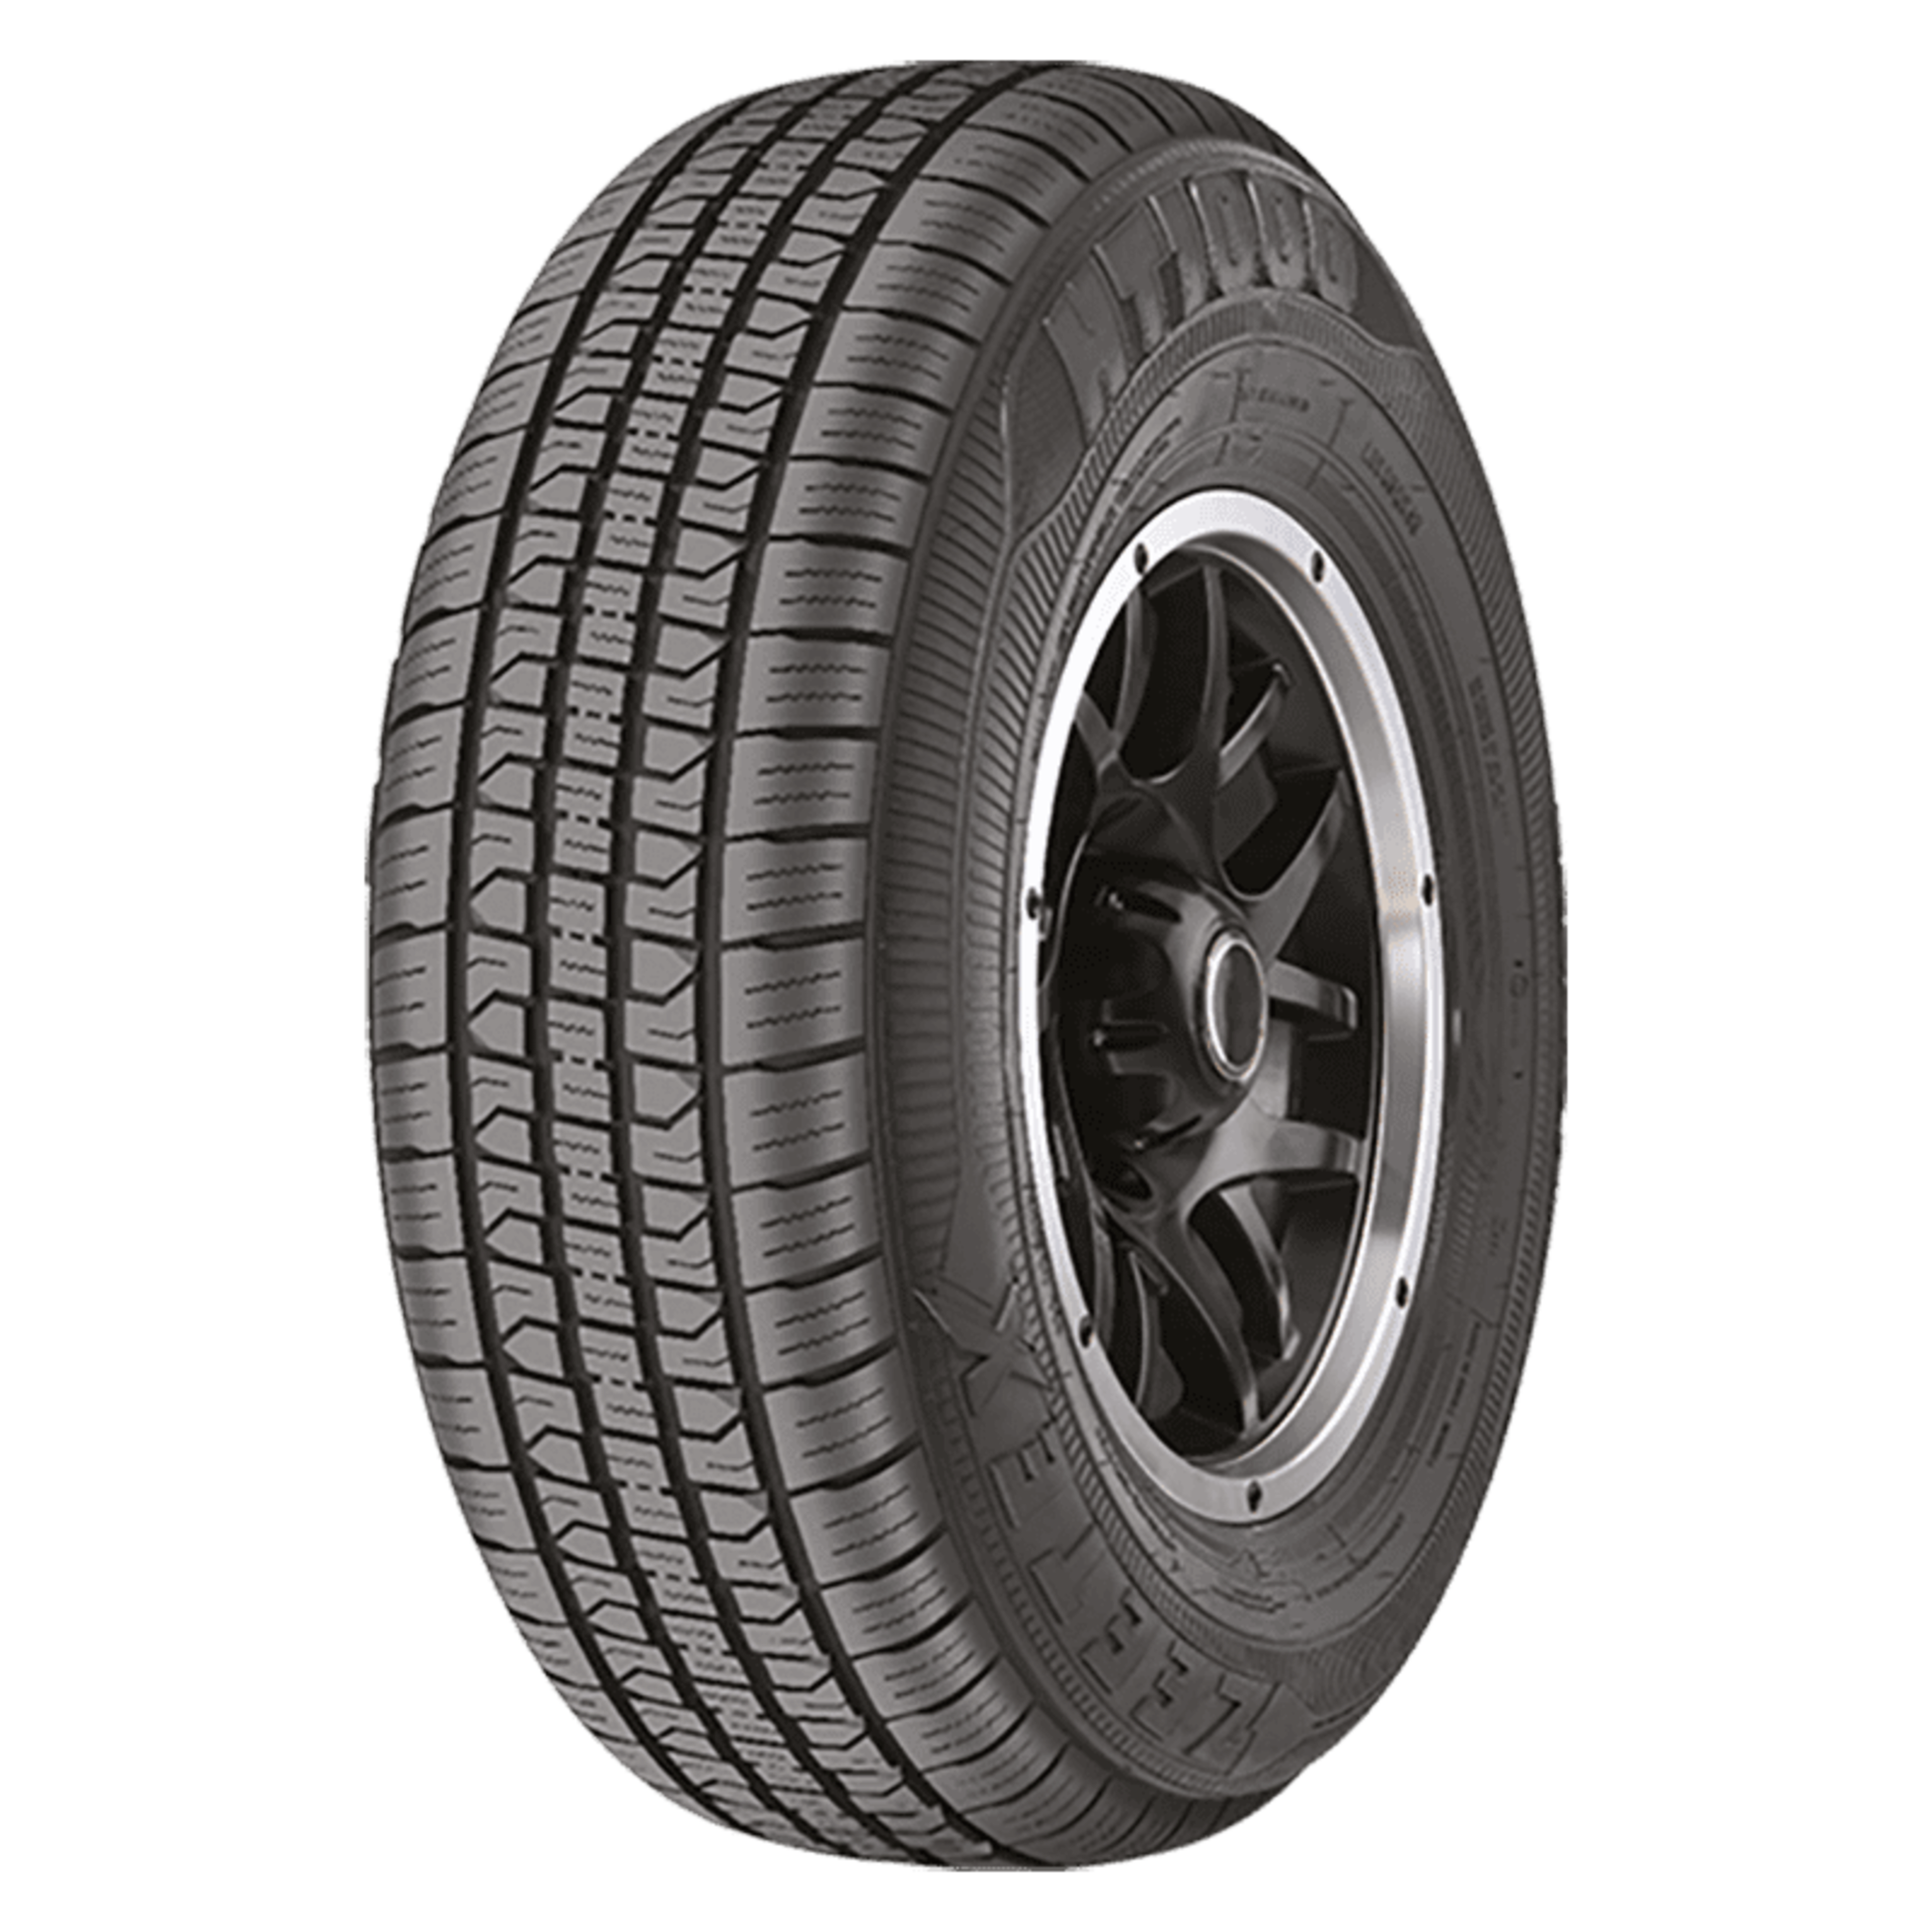 Shop for 275/70R16 Tires for Your Vehicle | SimpleTire